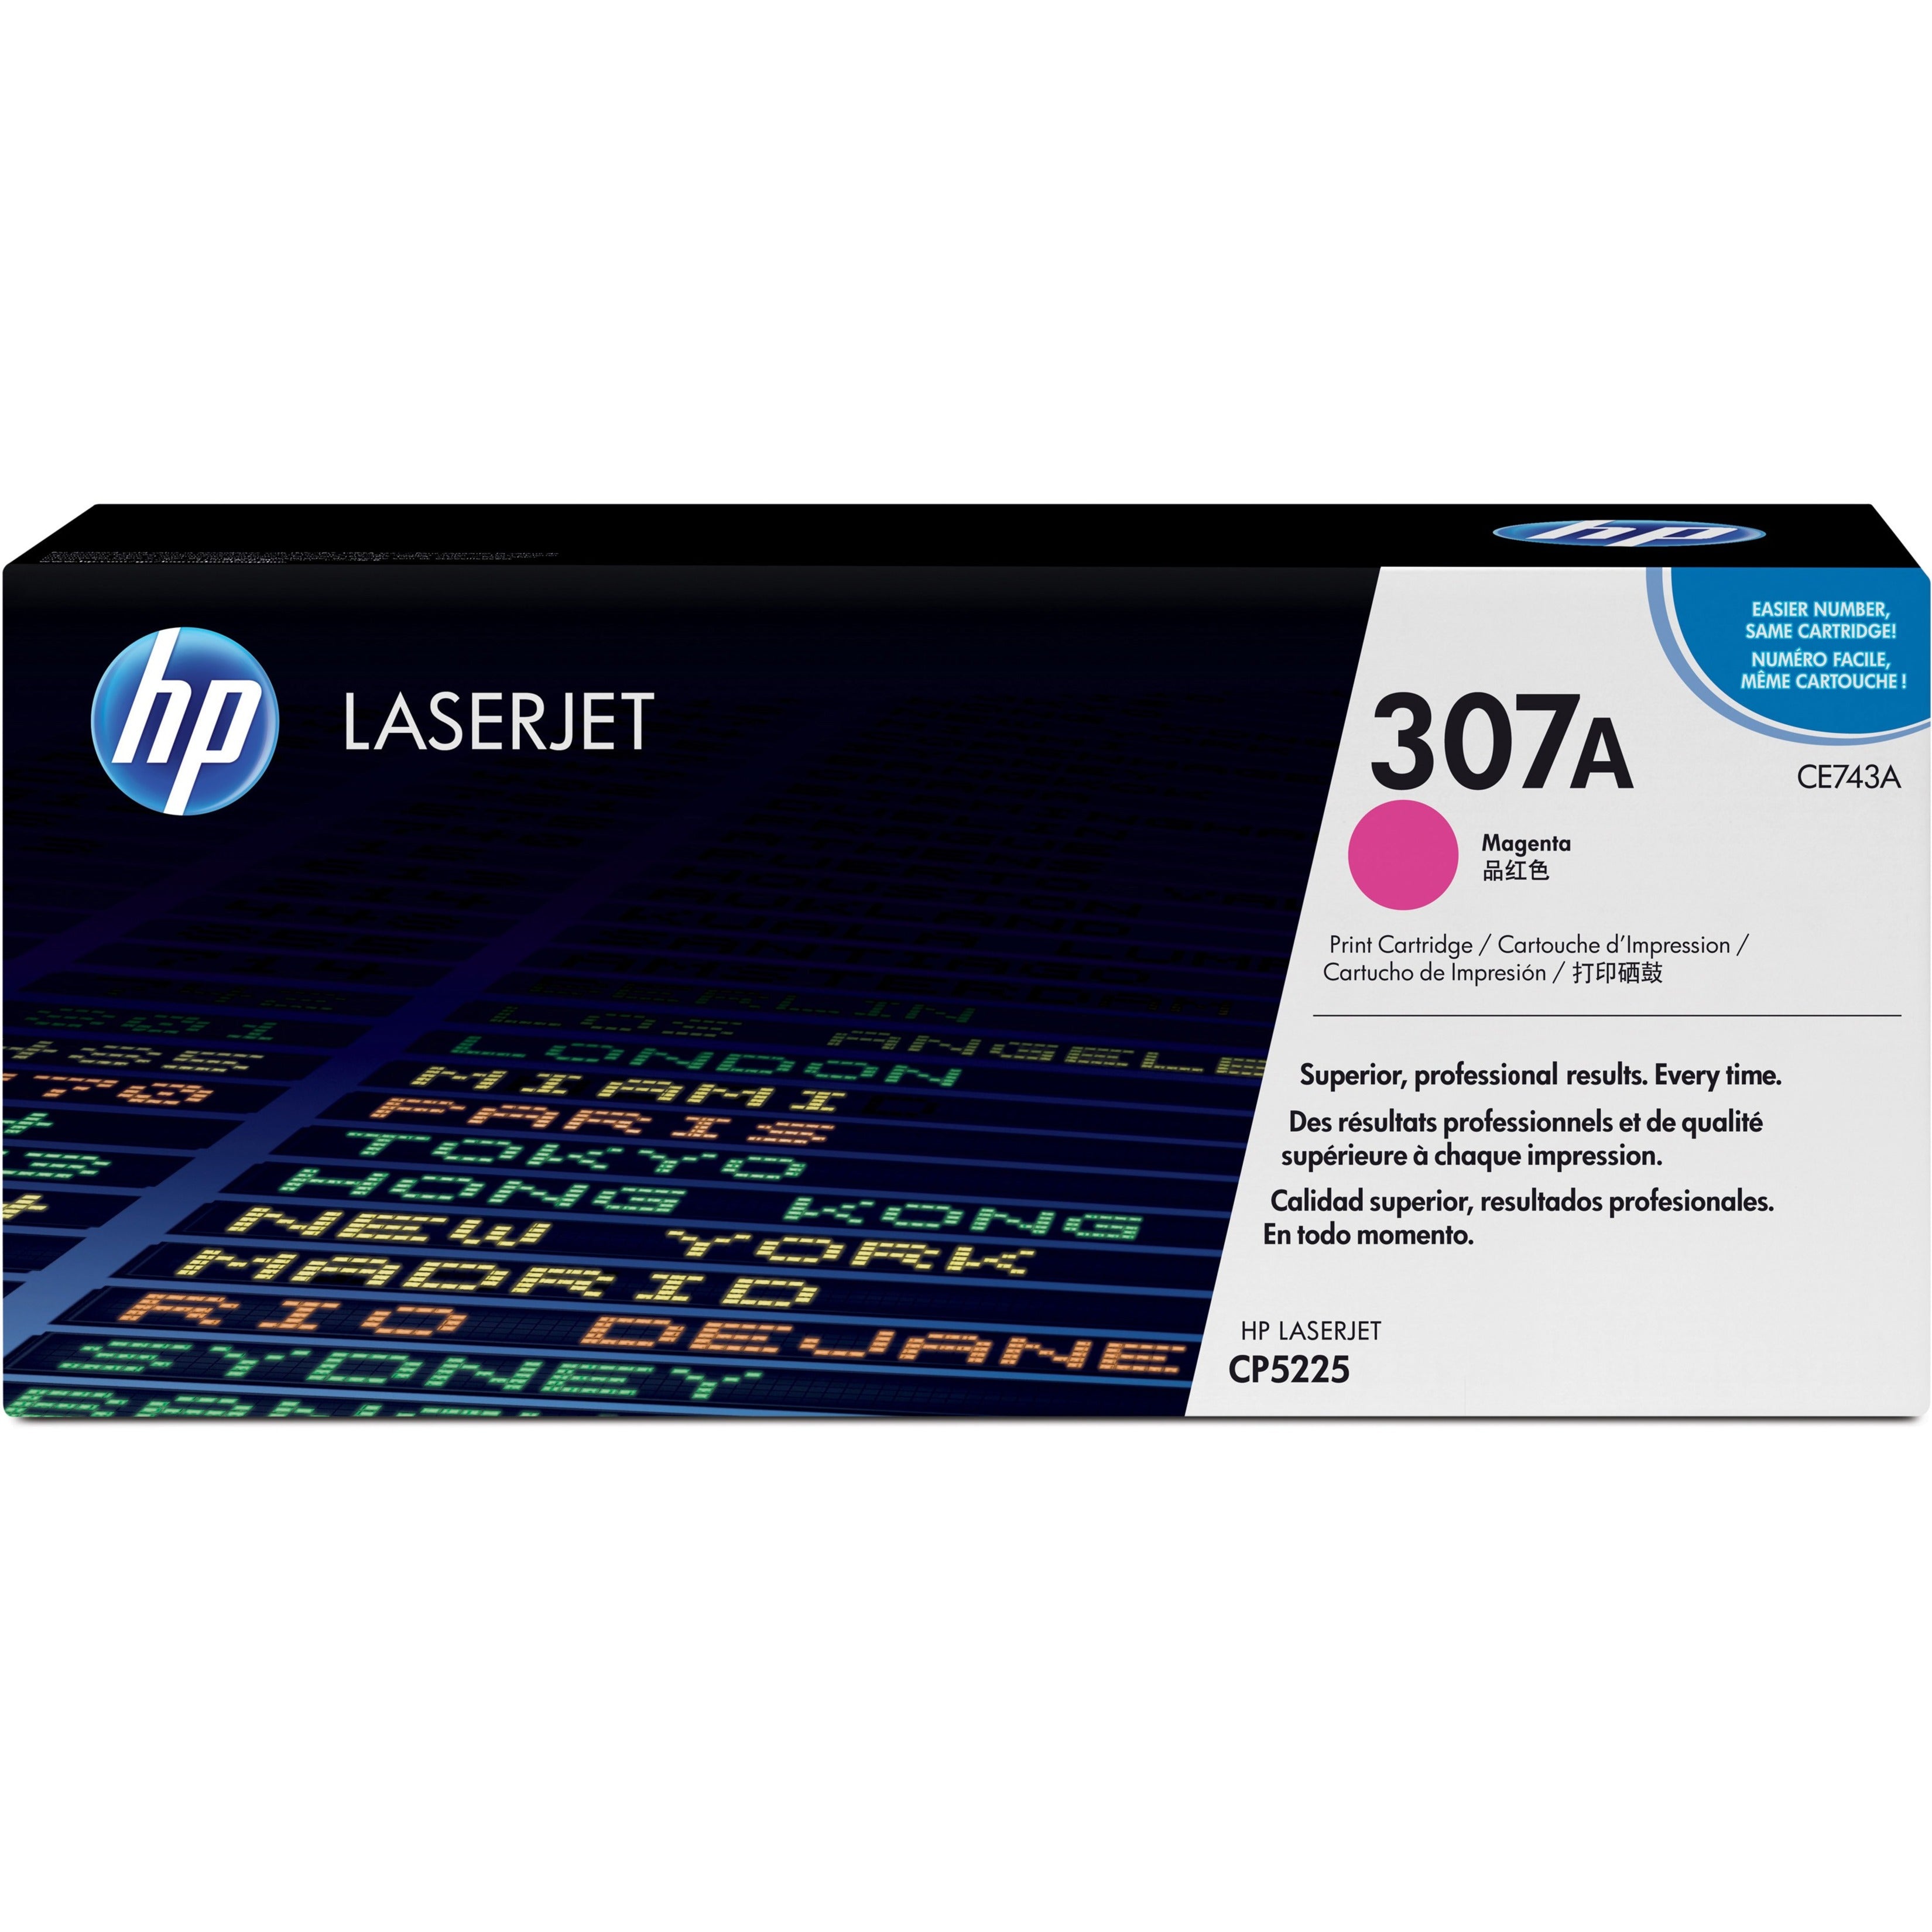 HP CE743A 307A Toner Cartridge, Magenta, 7,300 Page Yield